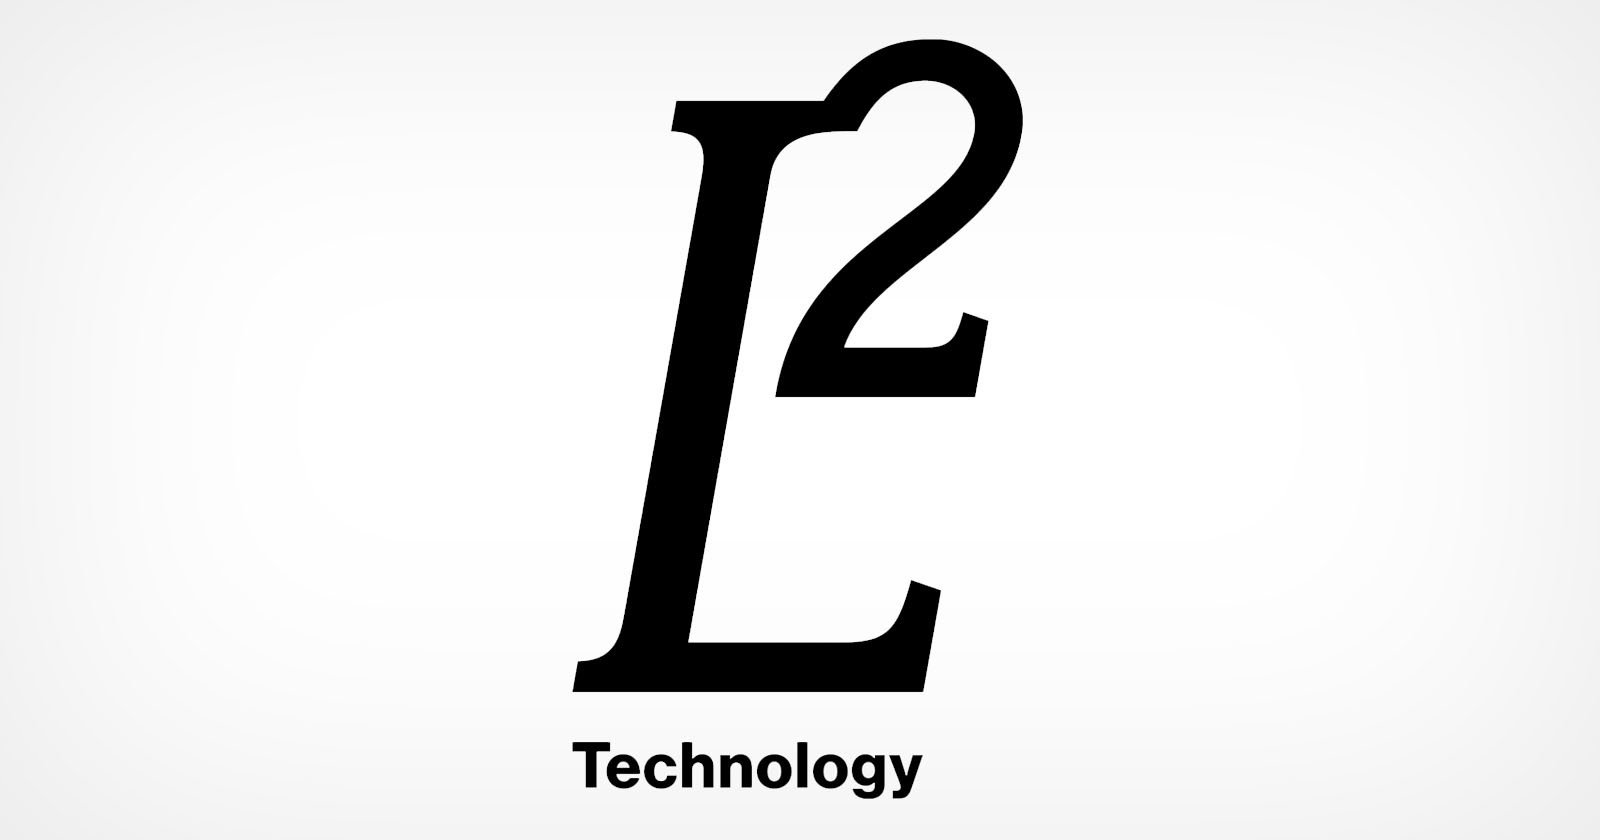 L Squared Technology